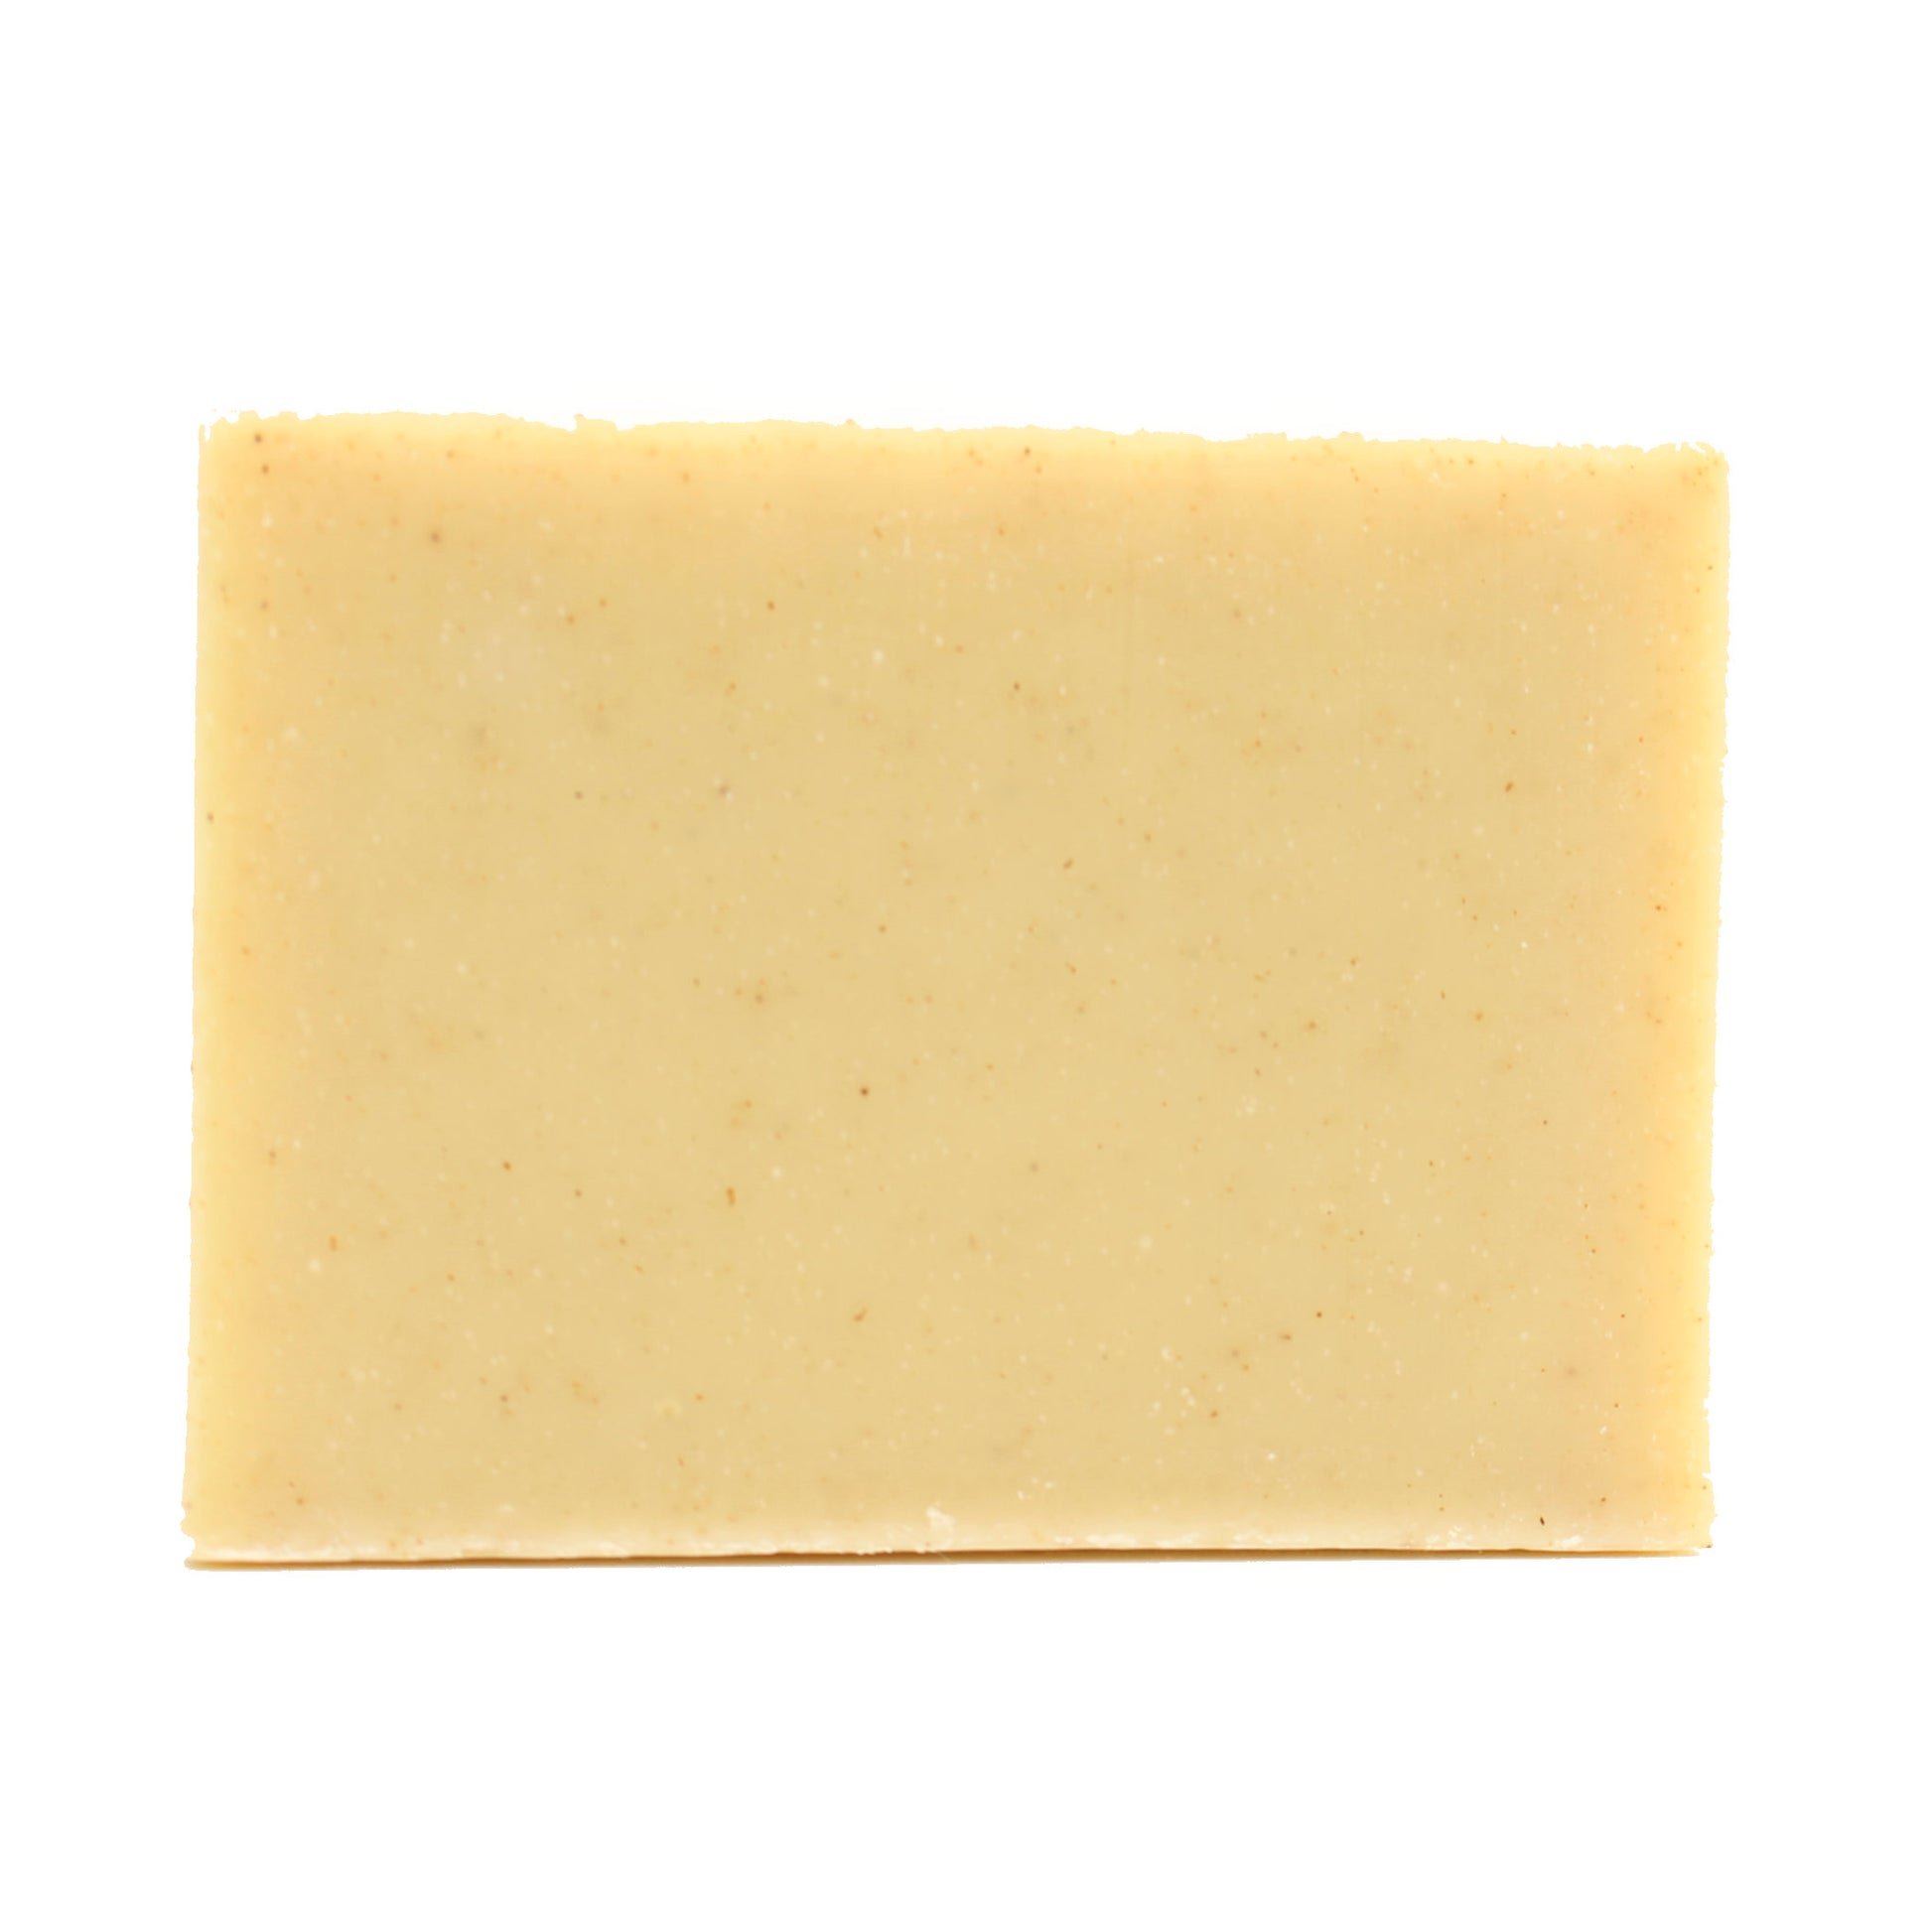 A naked bar of Plain Jane Unscented organic bar soap from ground Soap.